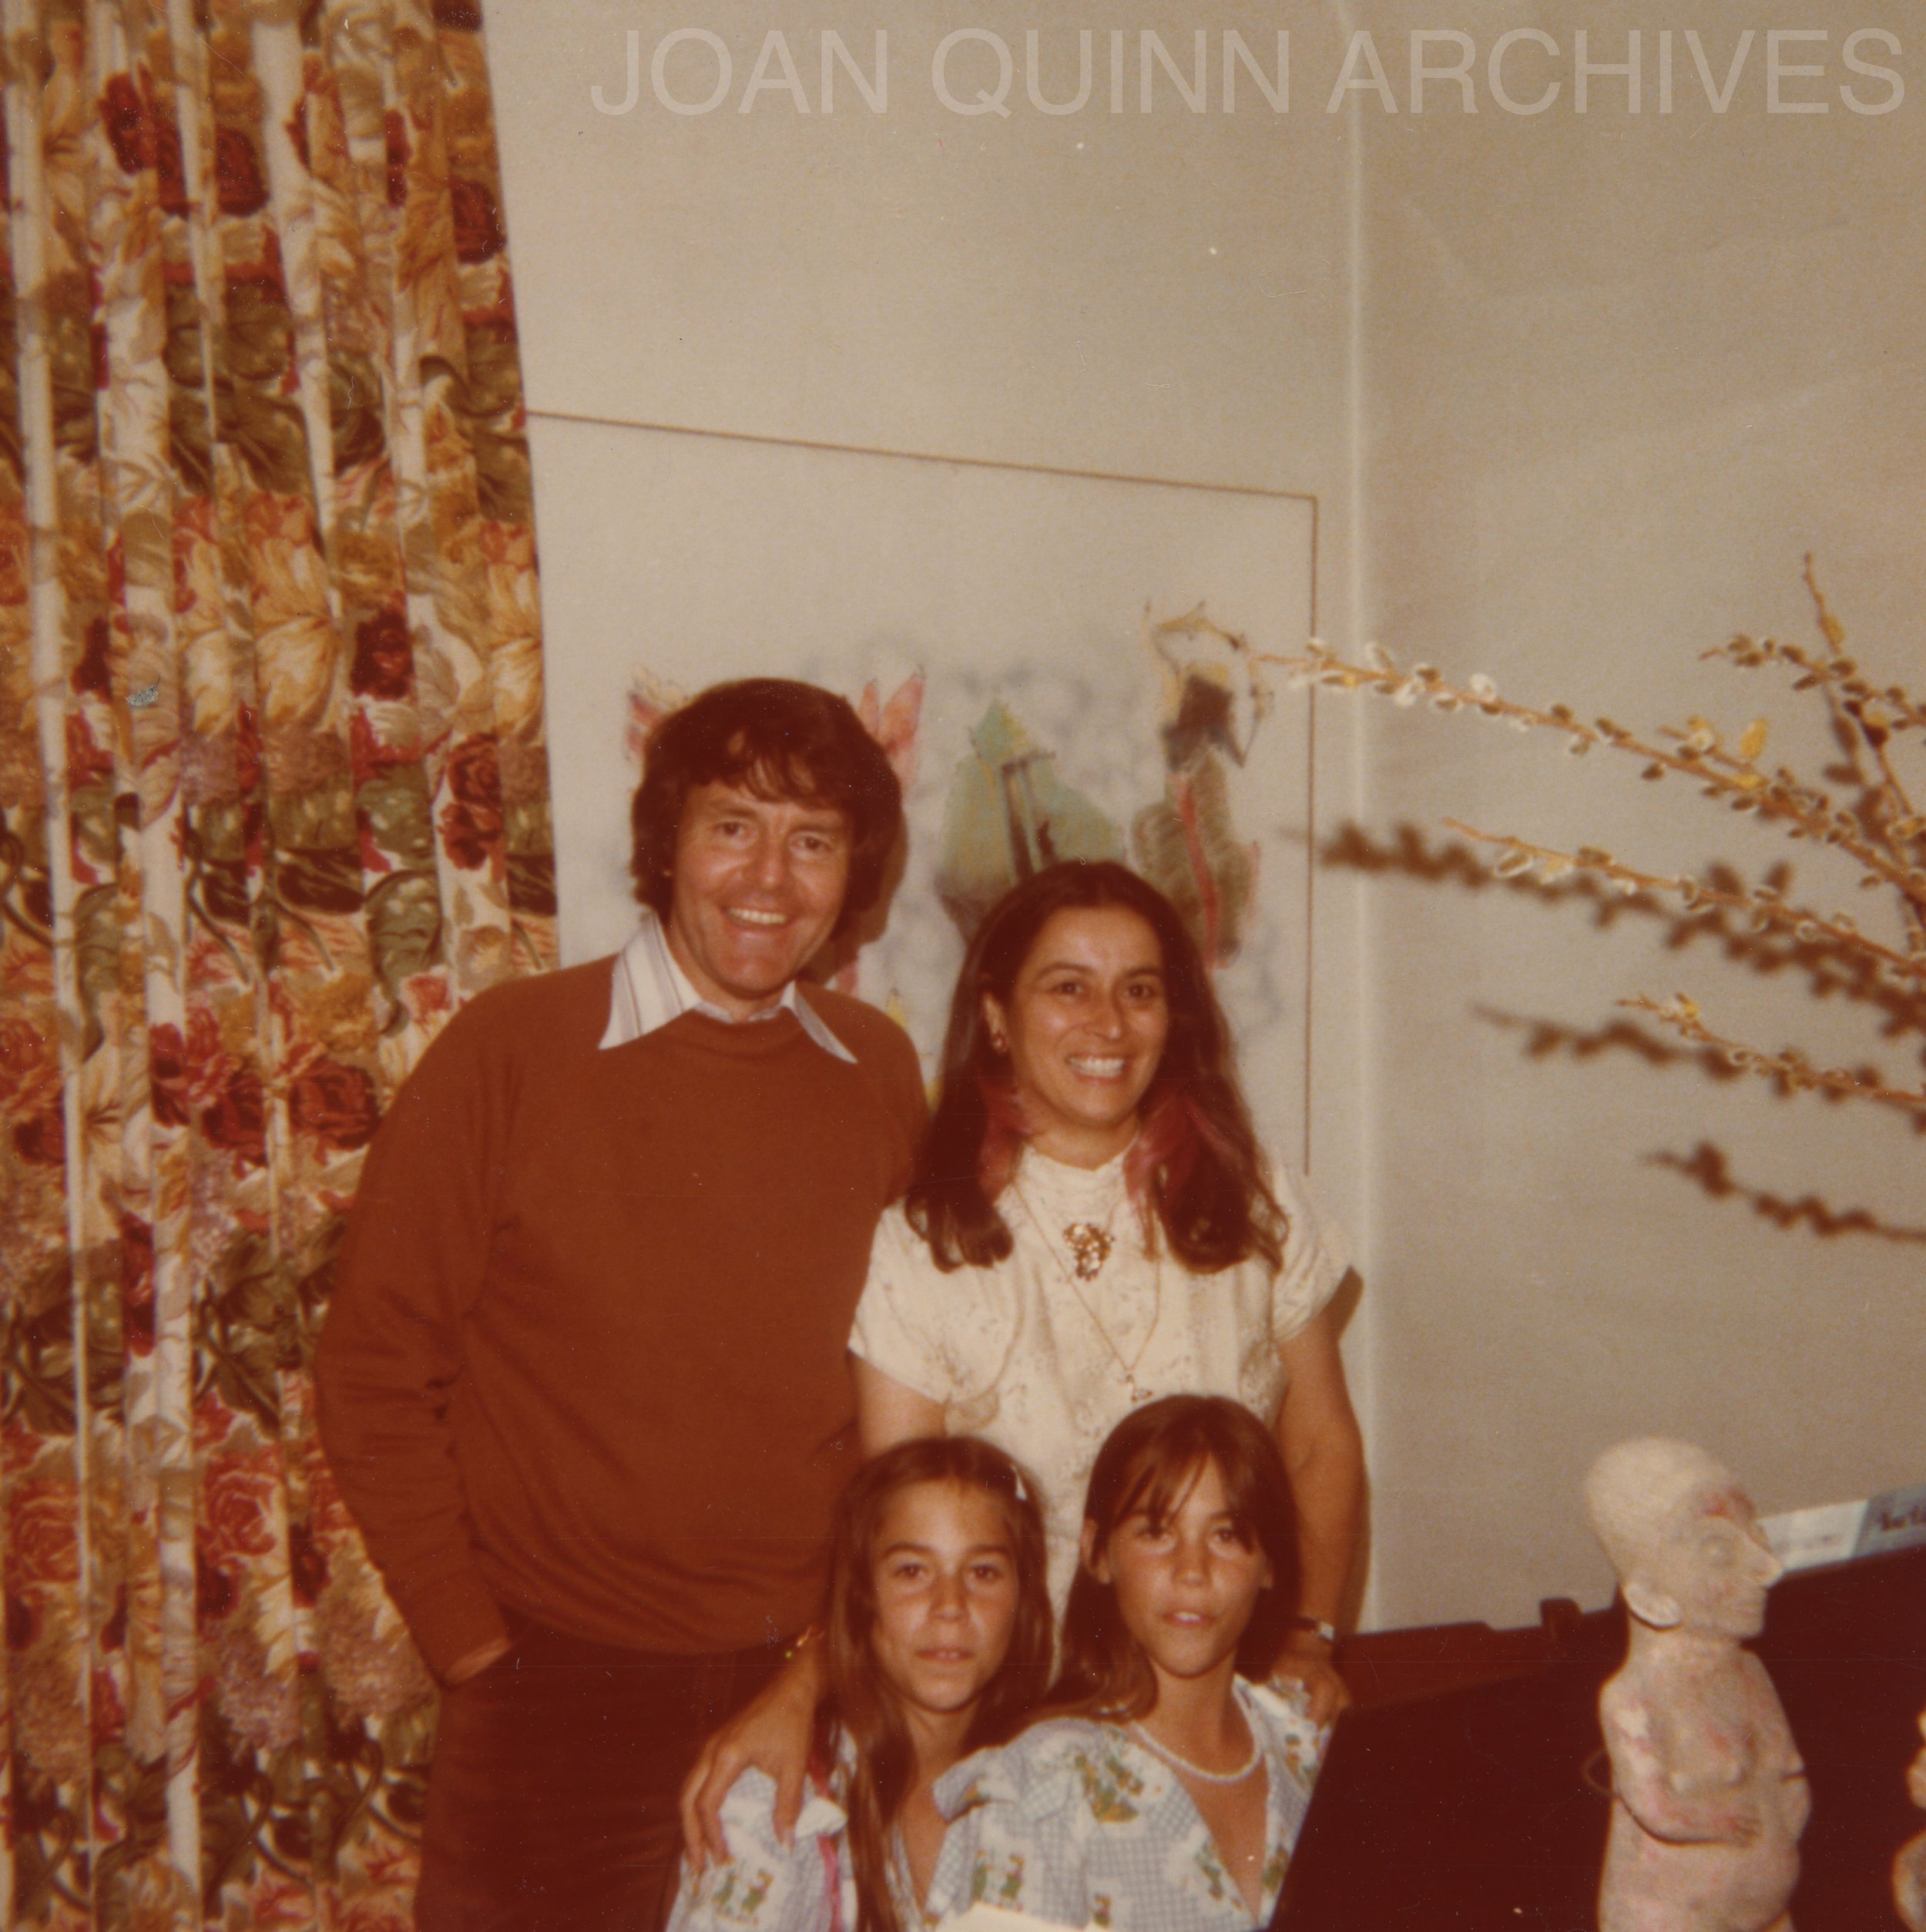 The Quinn family at homes, 1970s.